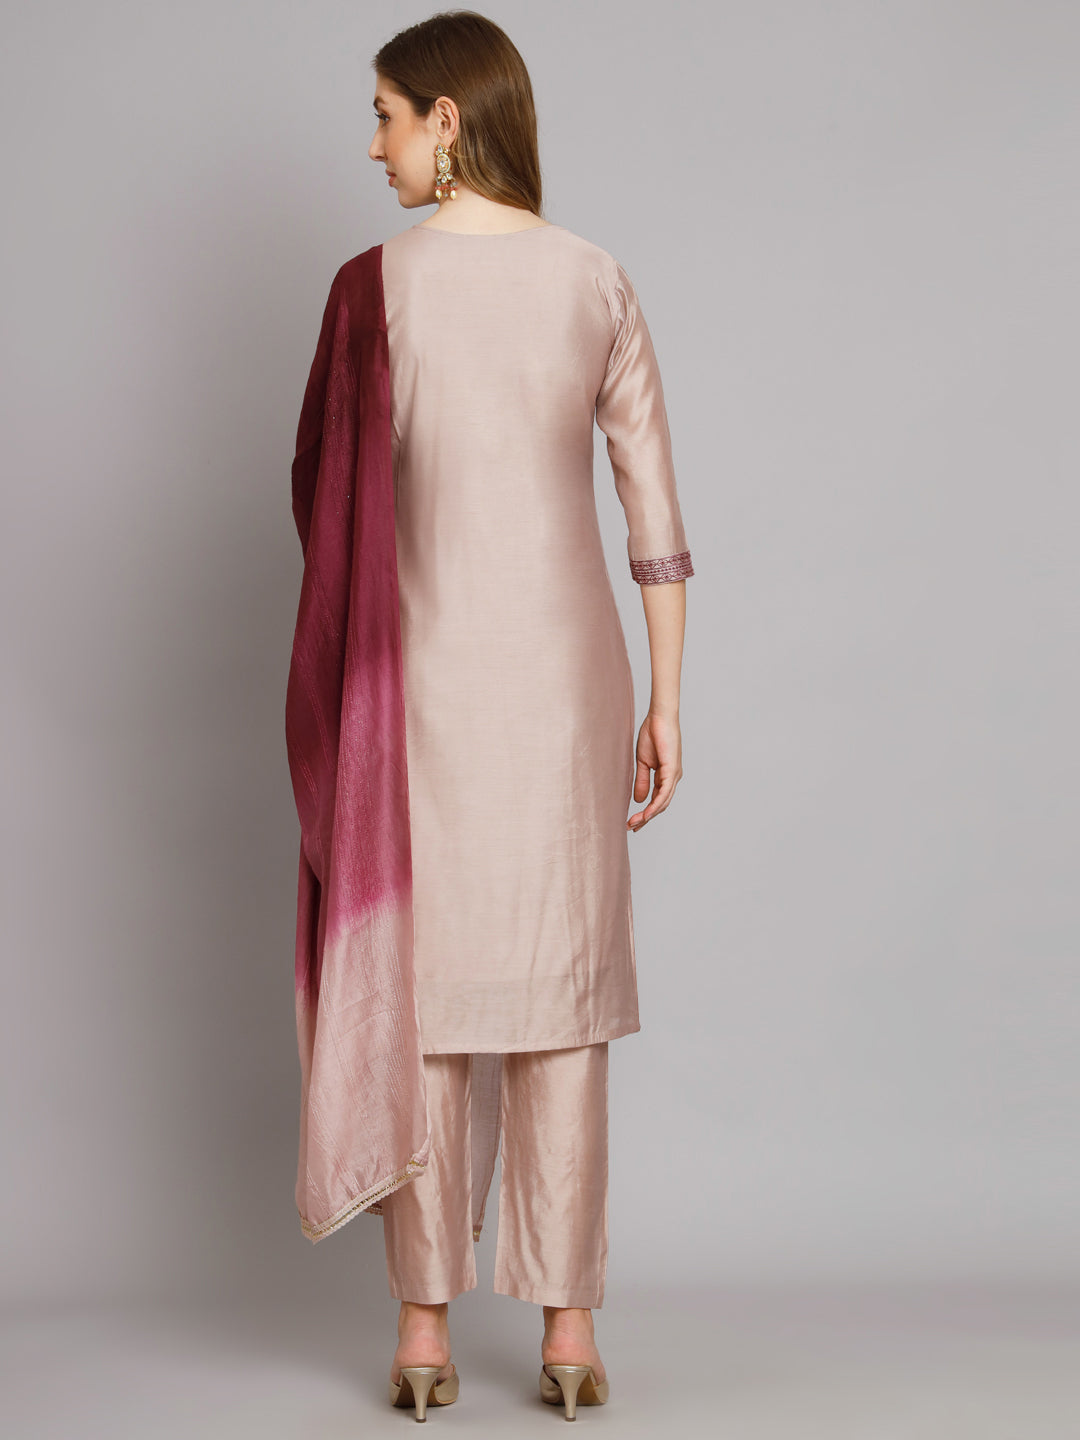 Mauve embroidered Kurta with Trousers with dupatta